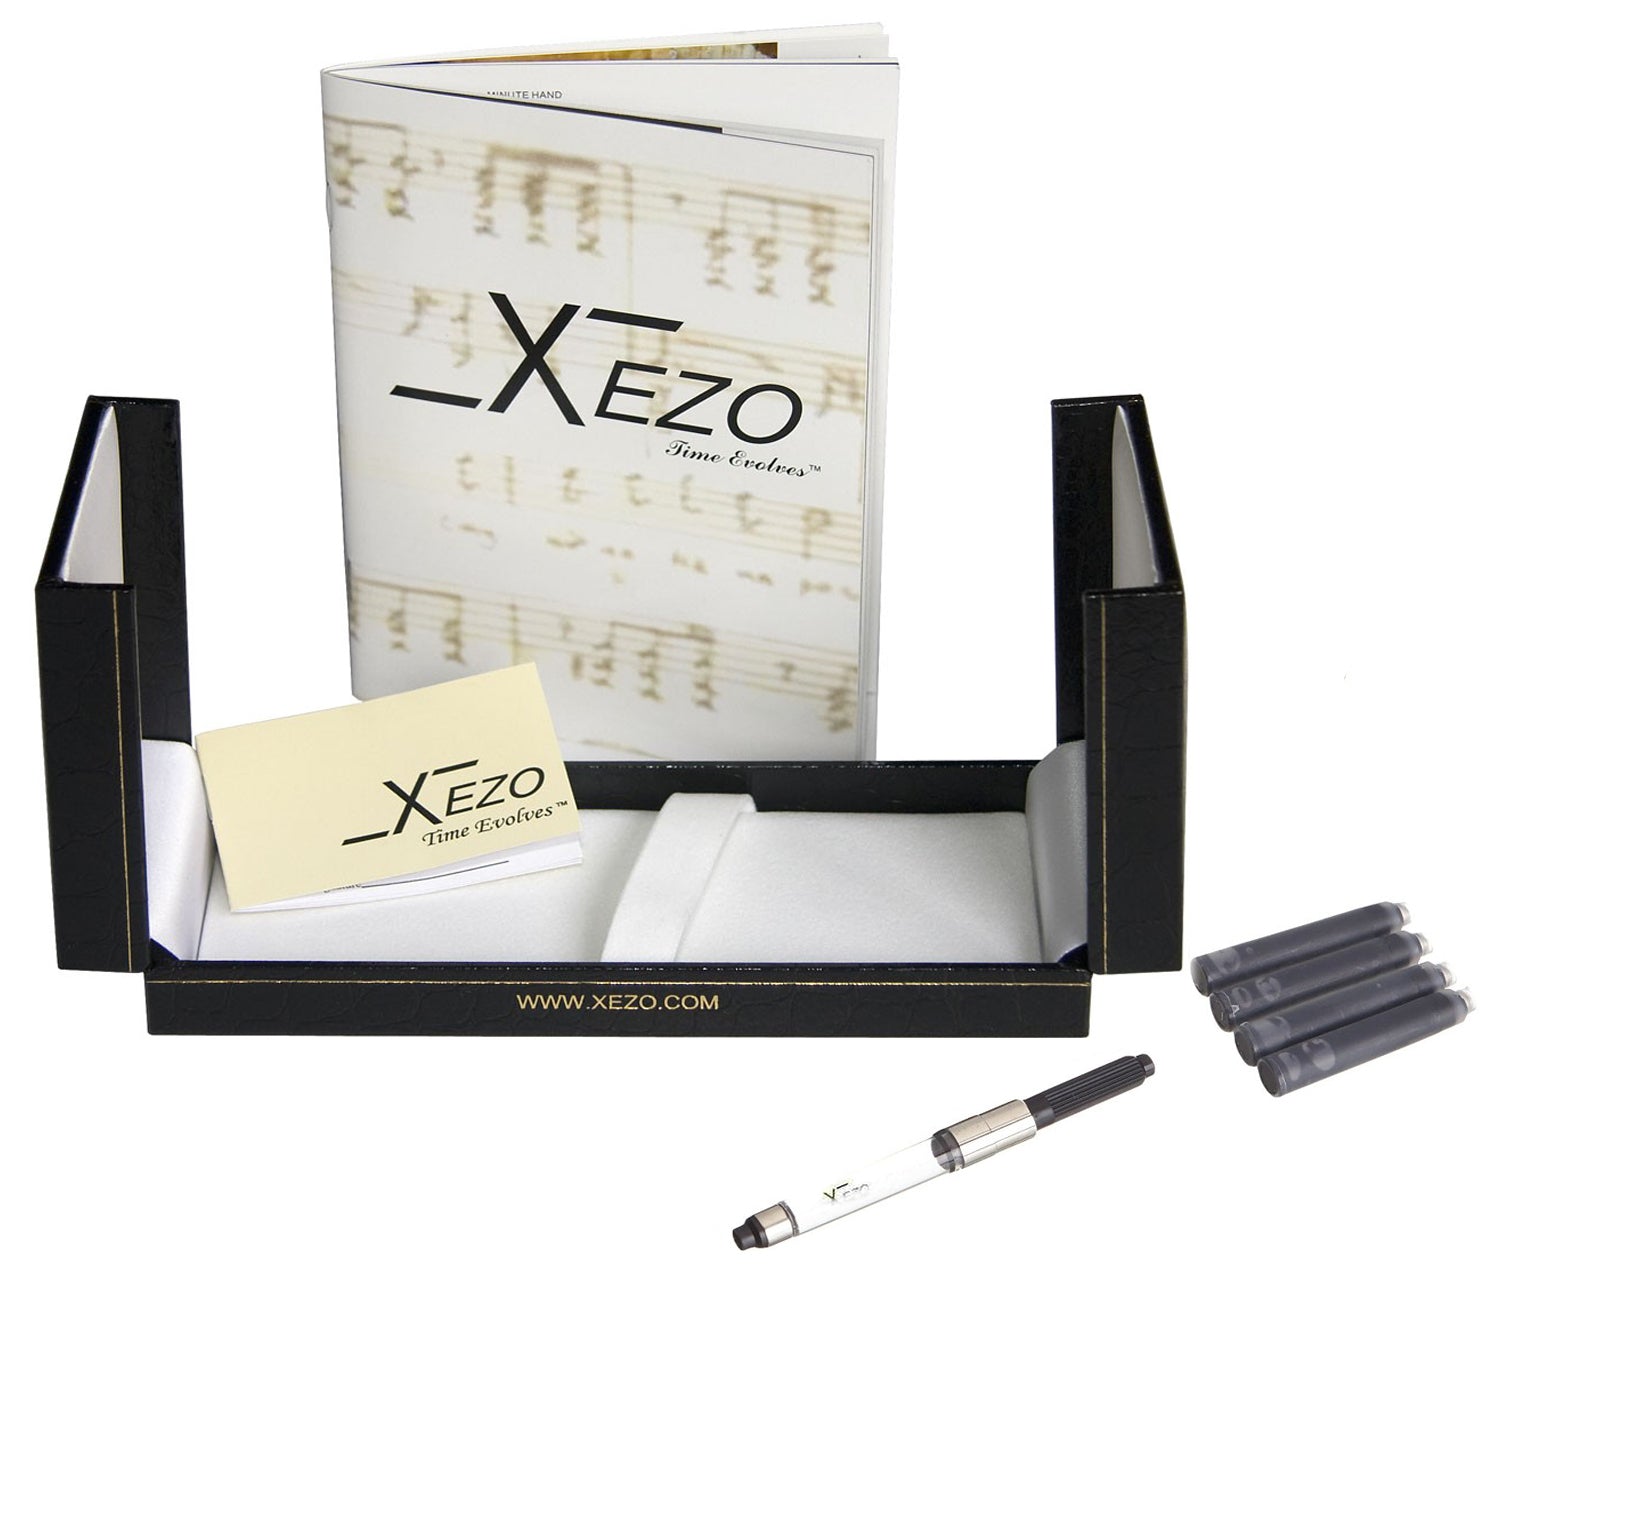 Xezo - Black gift box, certificate, manual, ink converter, and four ink cartridges of the Freelancer Venetian Blue F fountain pen